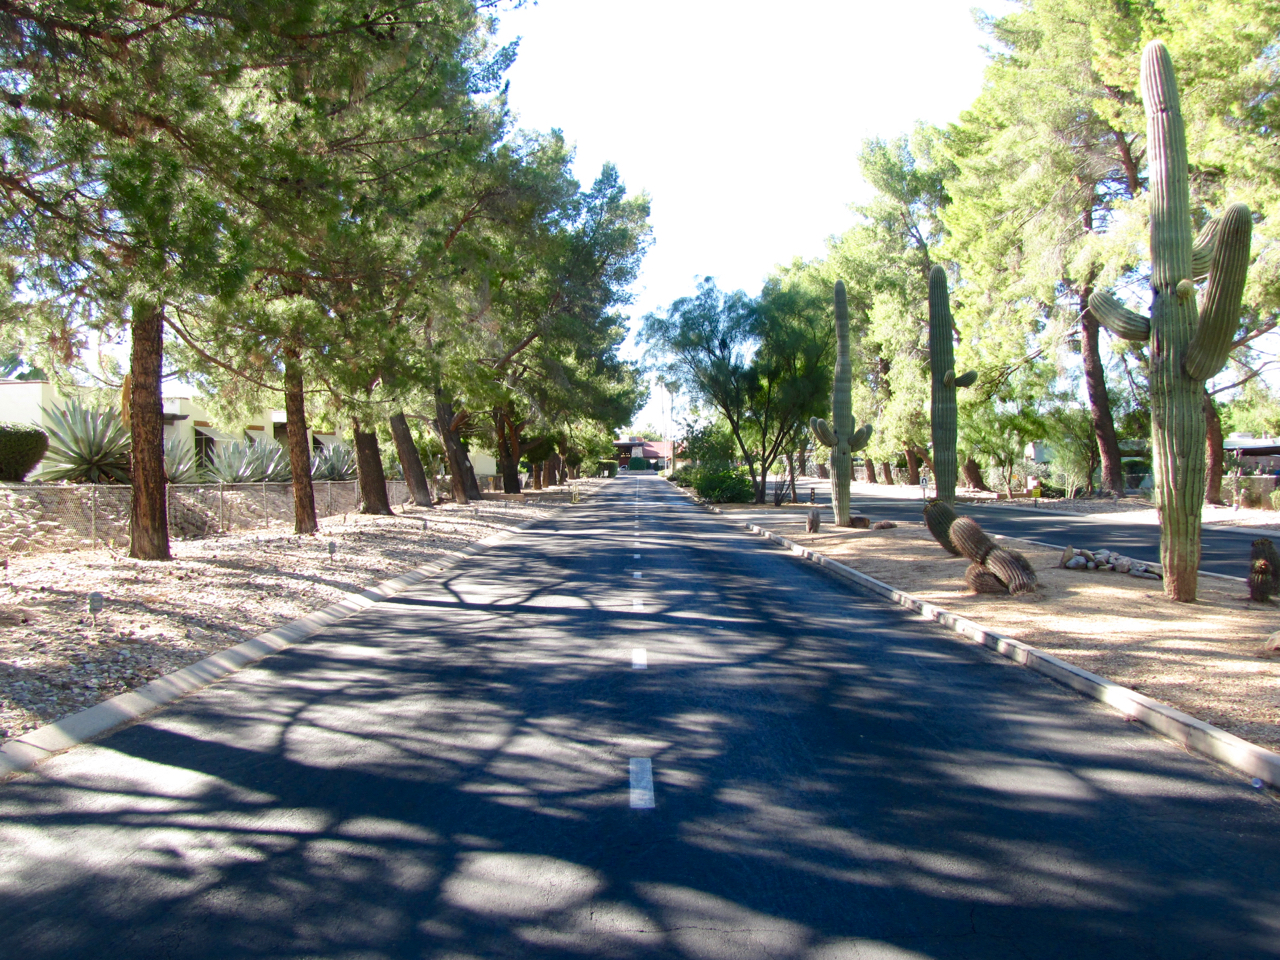 Driveway of entrance of Far Horizons East is lined with lush trees on both sides and cacti along the median.